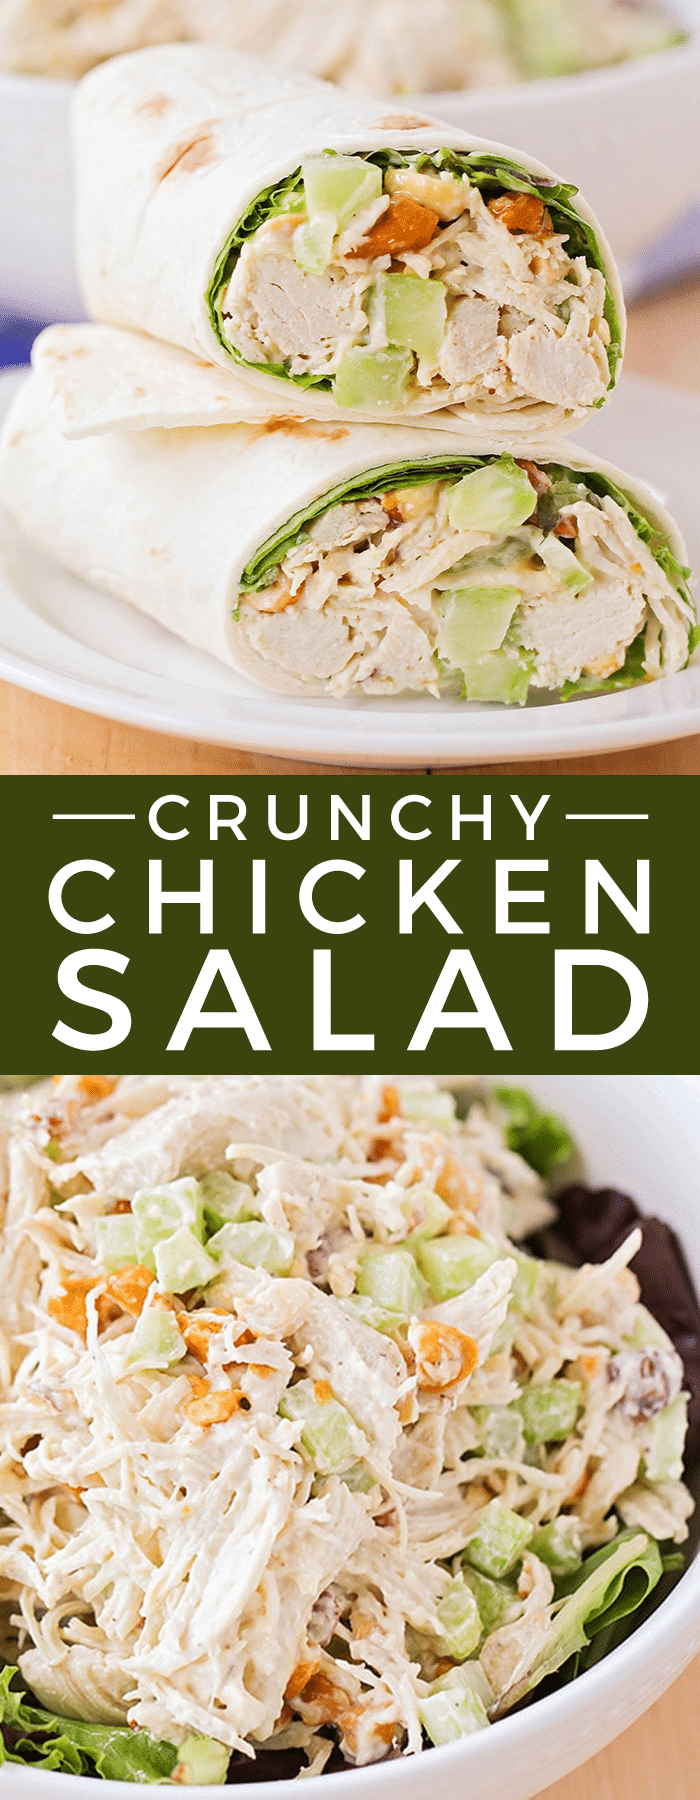 Cool and tasty with a delicious crunch - this chicken salad recipe just might be the best chicken salad recipe you'll ever make! Time to give it a try! #salad #healthyrecipes #healthyeating #easyrecipe #lunch  via @somewhatsimple